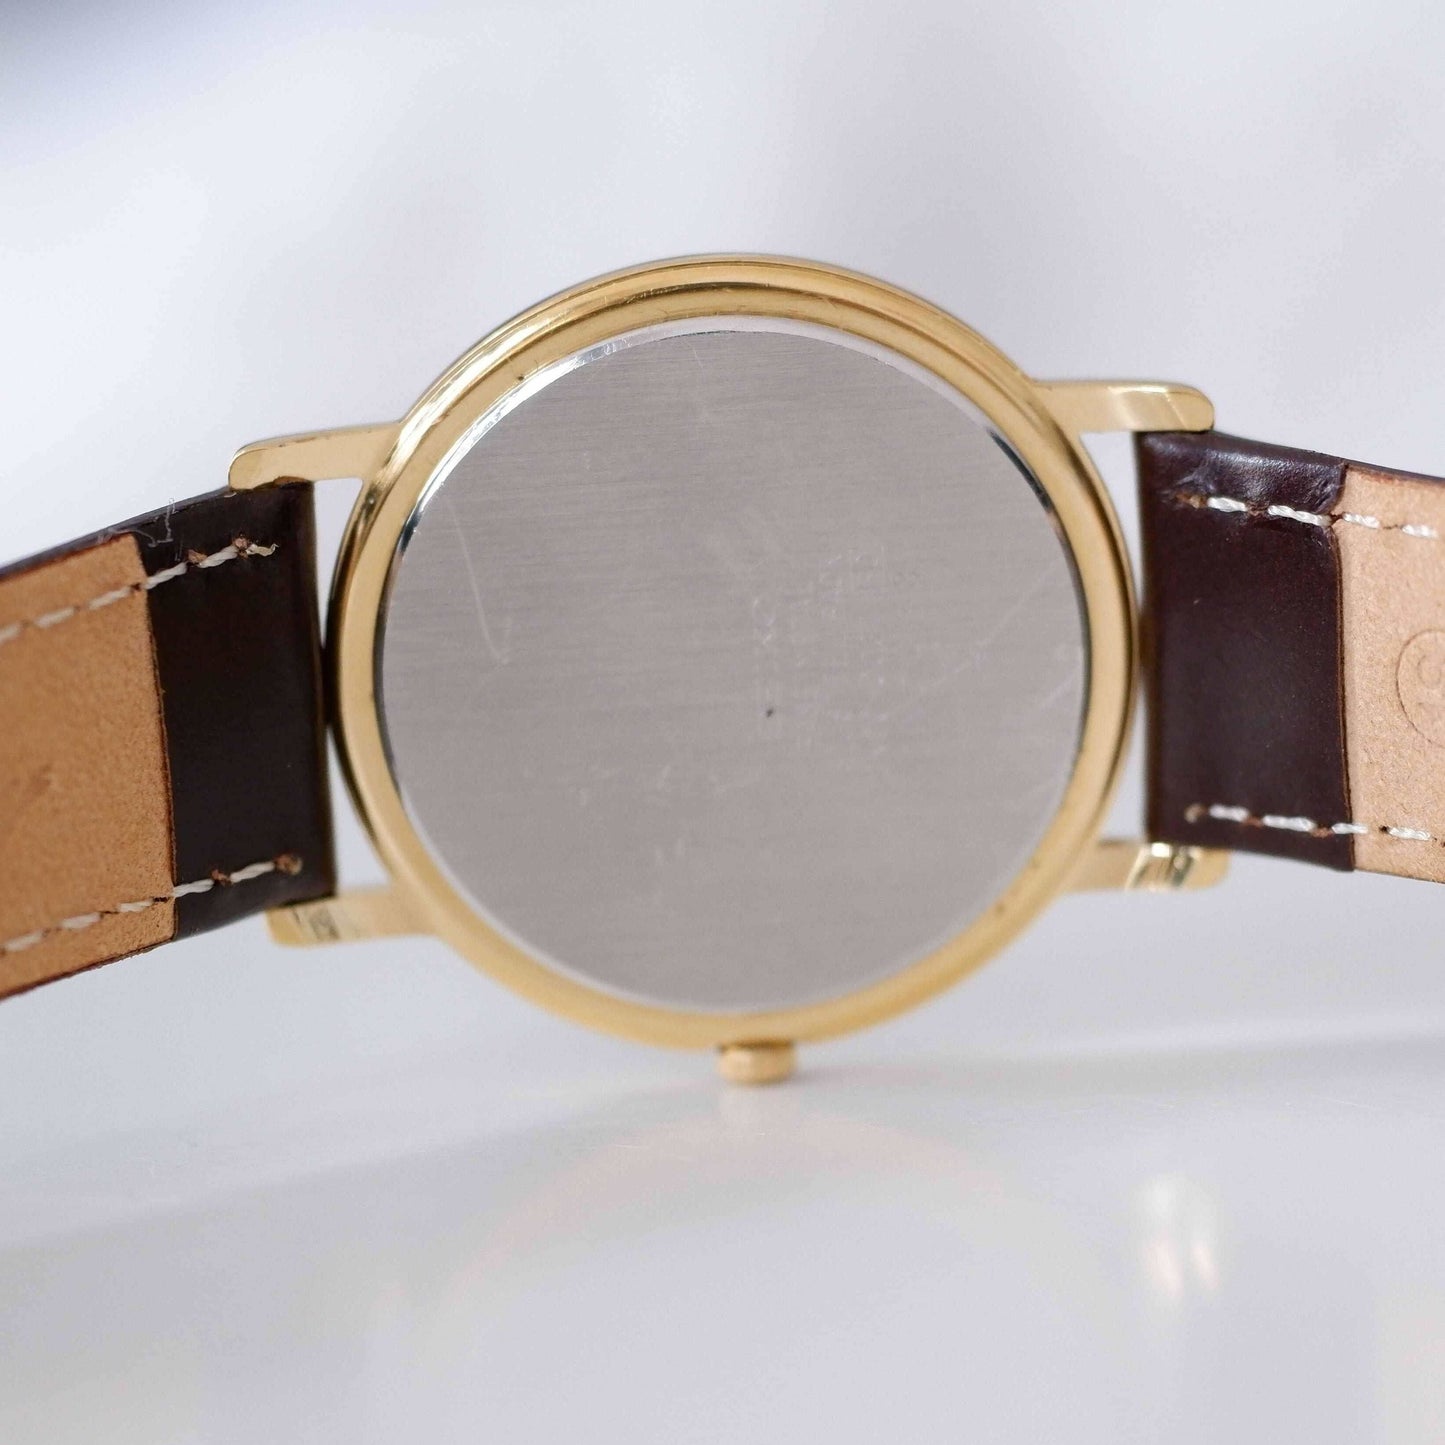 Seiko Vintage Ladies Watch: 90s Gold with Elegant Roman Numerals, Back Side